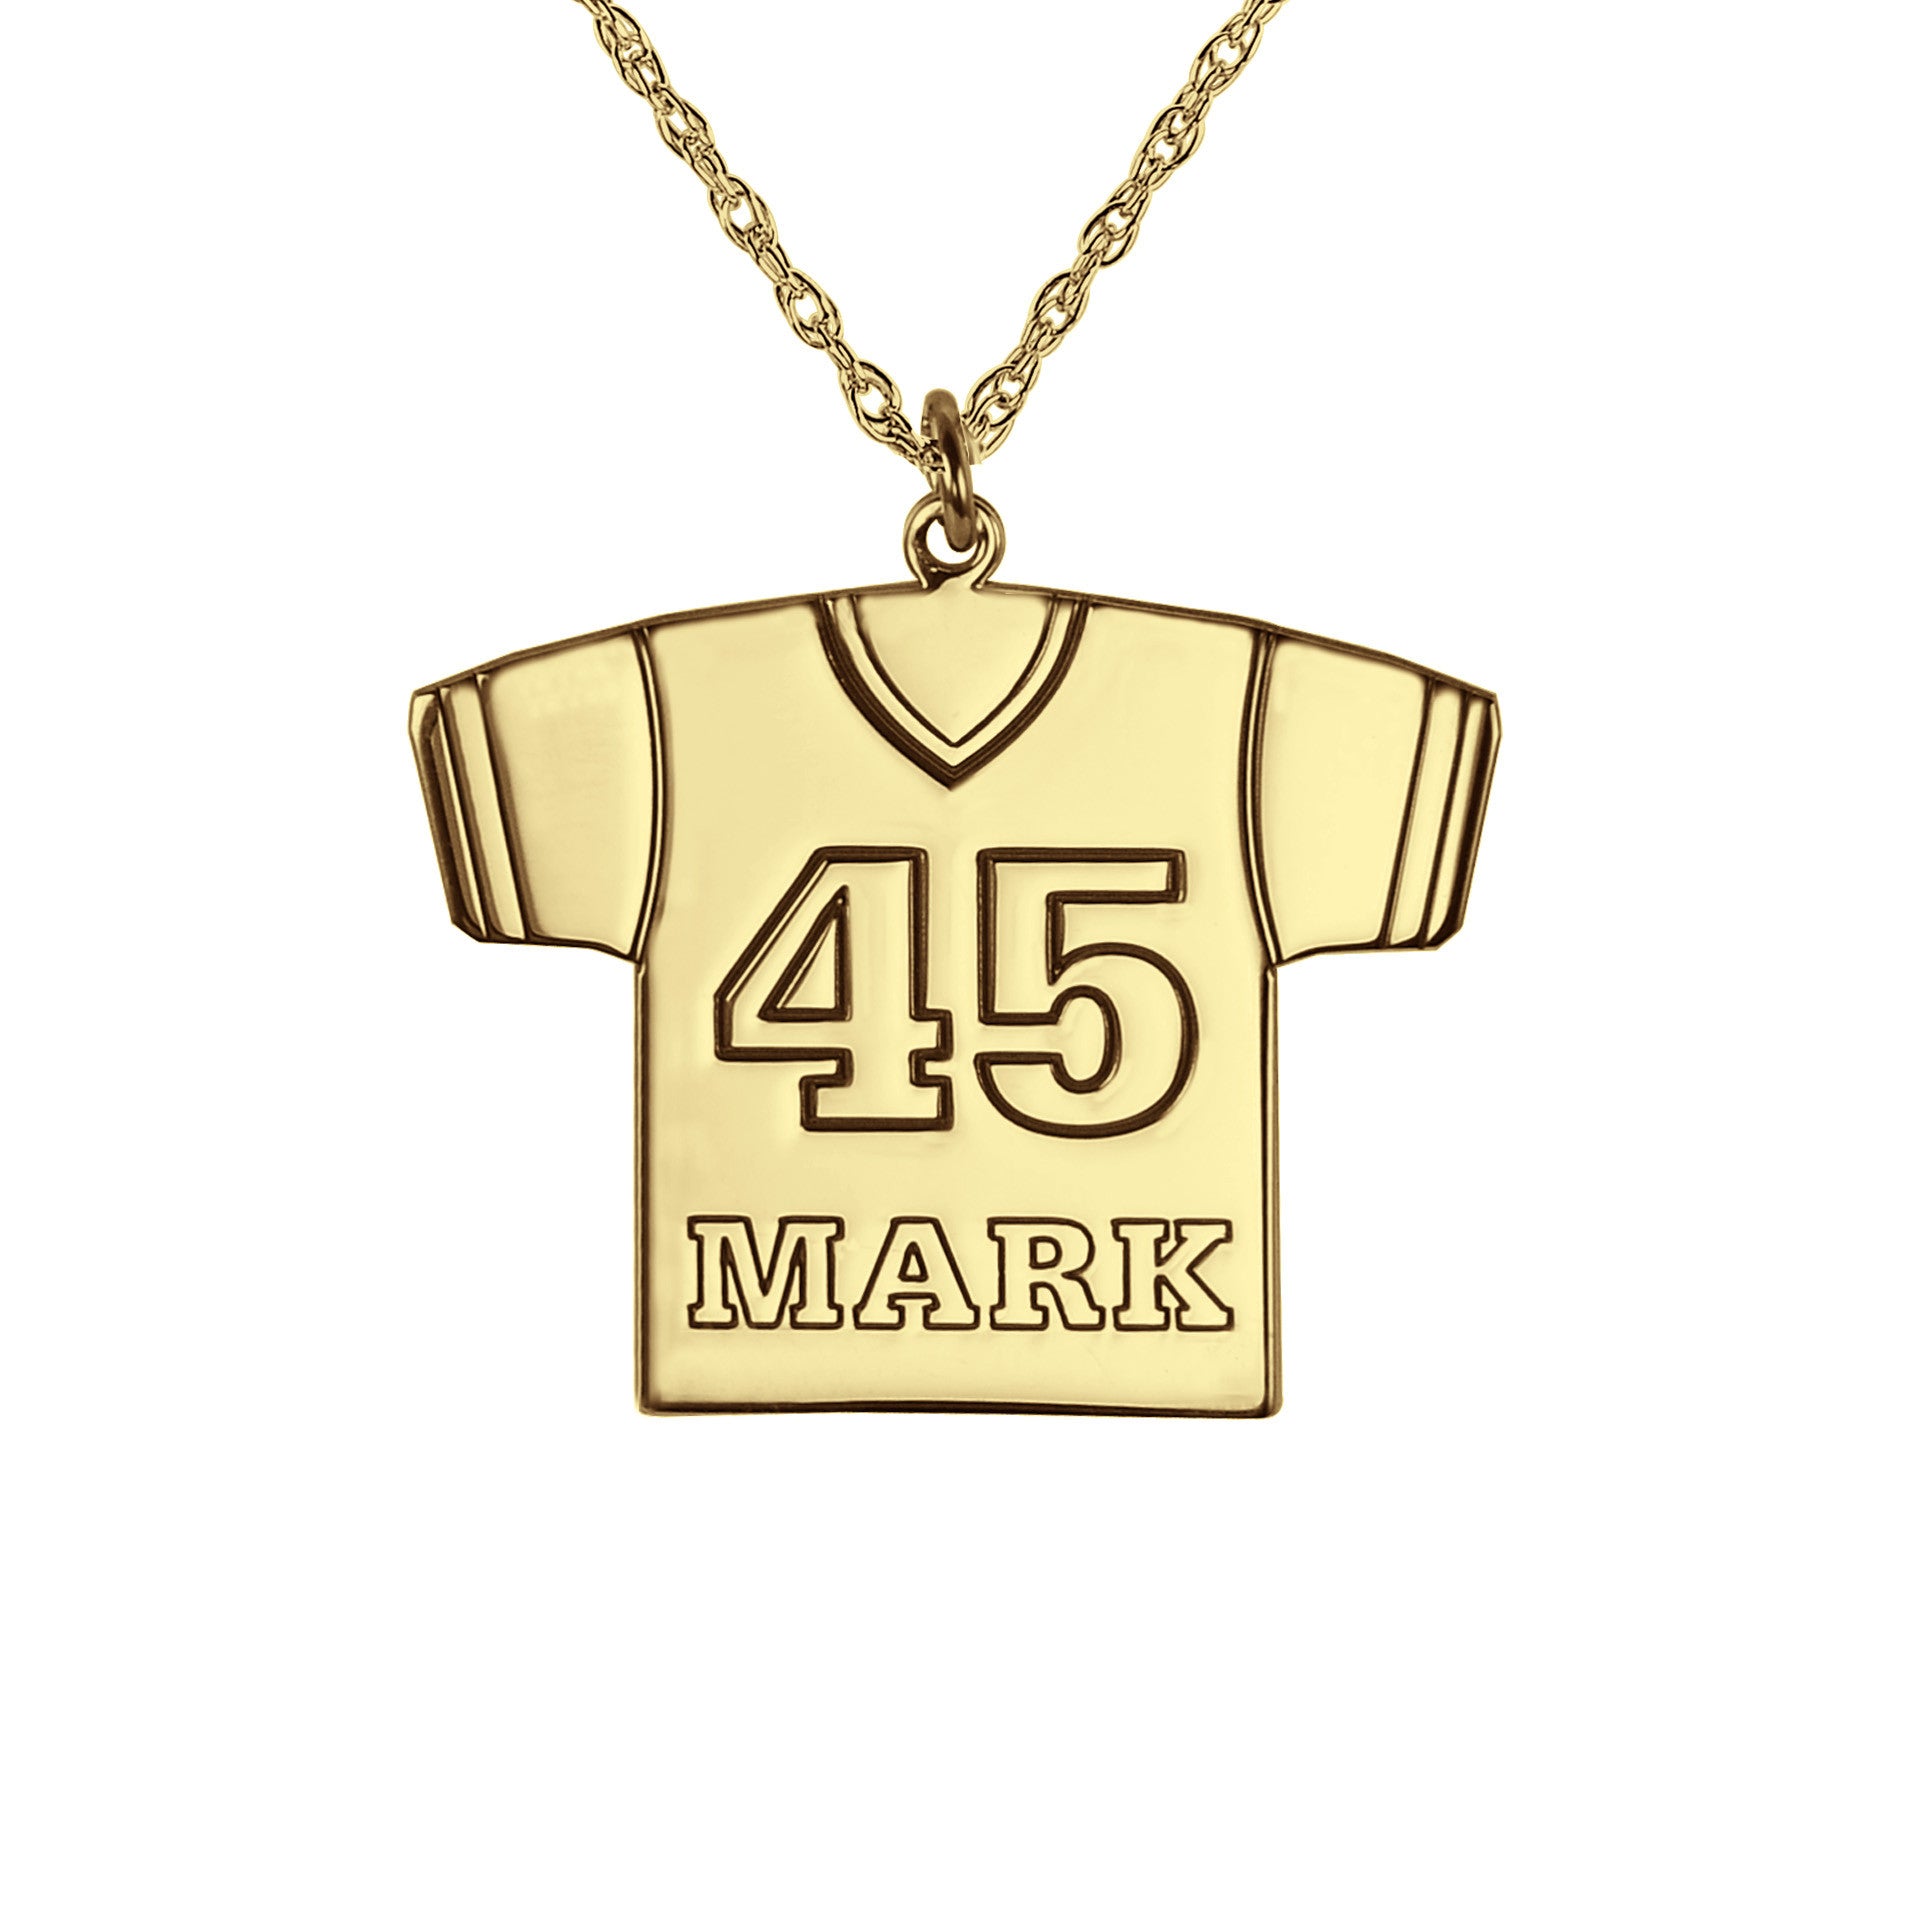 Personalized football charm necklace | kandsimpressions